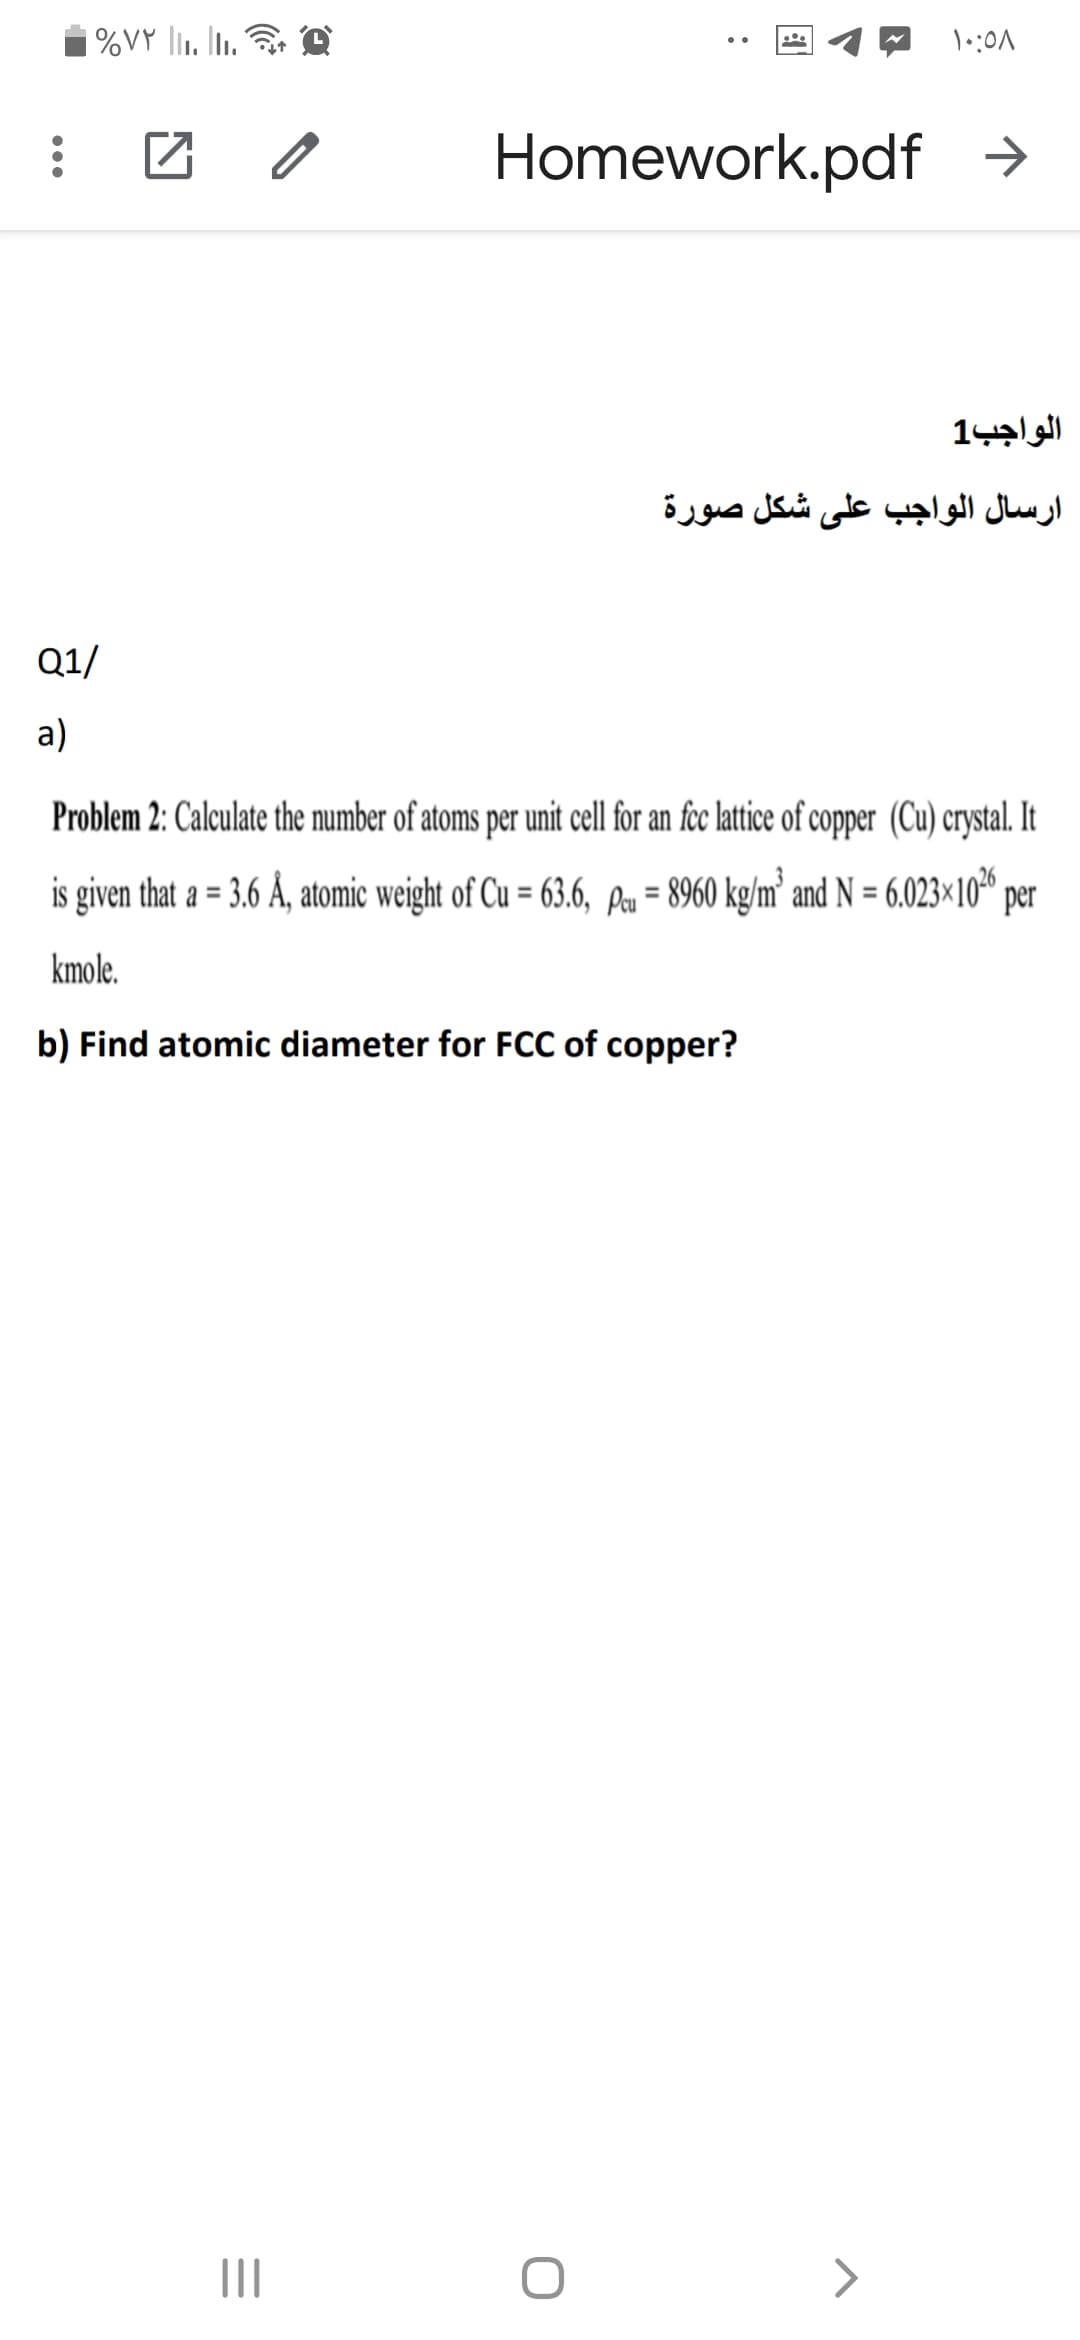 %VY l1. Iu.
团 。
Homework.pdf →
الواجب1
ارسال الواجب على شكل صورة
Q1/
а)
Problem 2: Calculate the number of atoms per unit cell for an fec lttice of copper (Cu) crystal. It
is given that a = 3.6 Å, atomic weight of Cu = 63.6, Pu = 8960 kg/m² and N = 6.023×10" per
%3D
%3D
%3D
kmole.
b) Find atomic diameter for FCC of copper?
II
>
